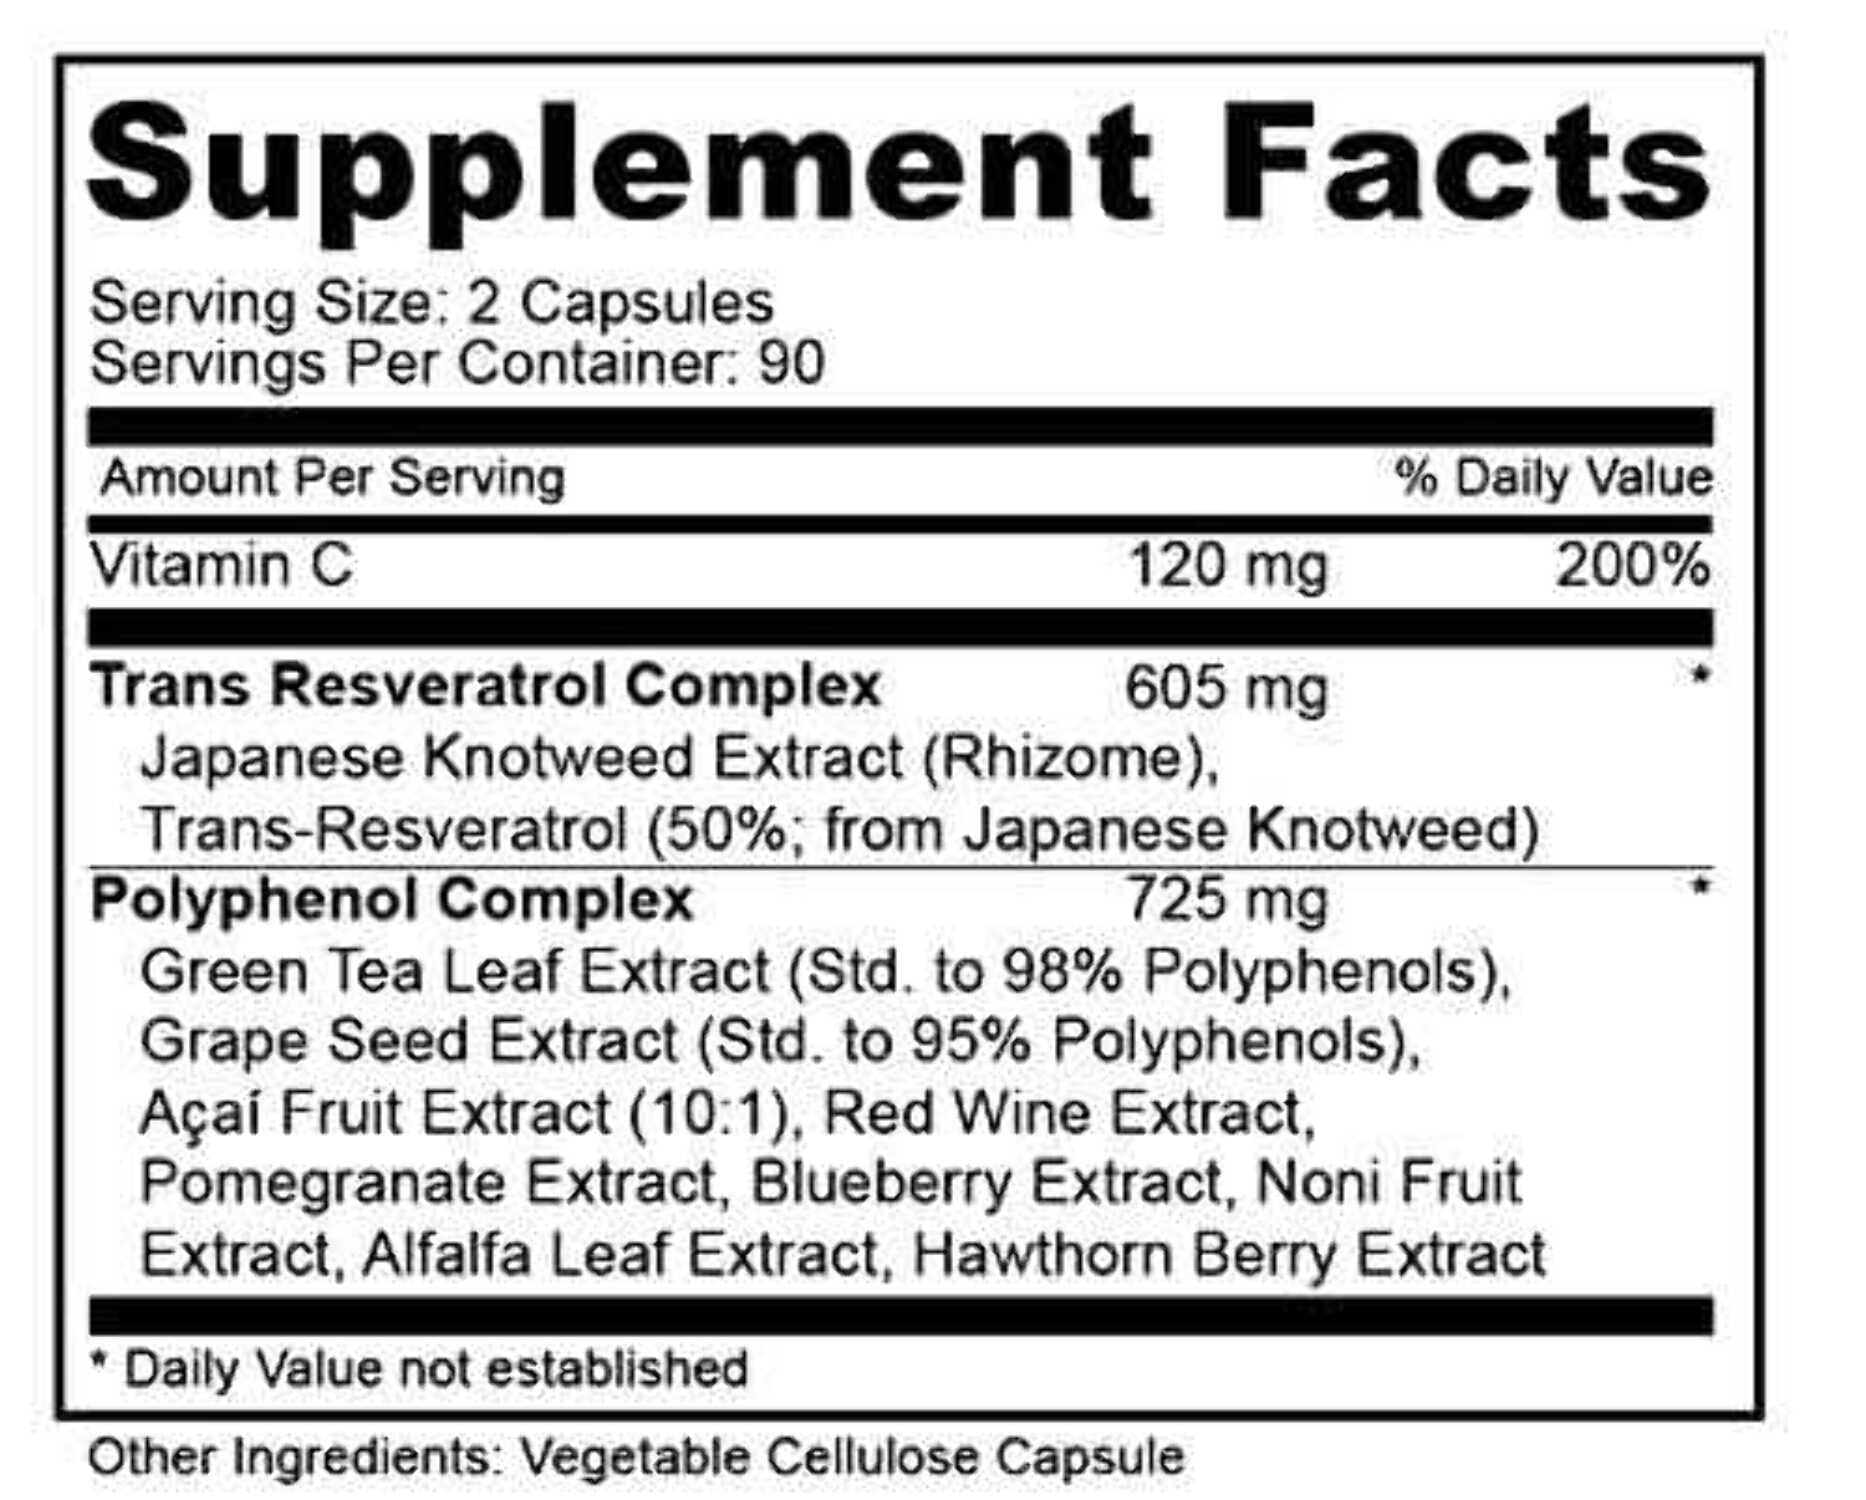 PURELY beneficial RESVERATROL1450-90day Supply, 1450mg per Serving of Potent Antioxidants & Trans-Resveratrol, Promotes Anti-Aging, Cardiovascular Support, Maximum Benefits (1bottle)